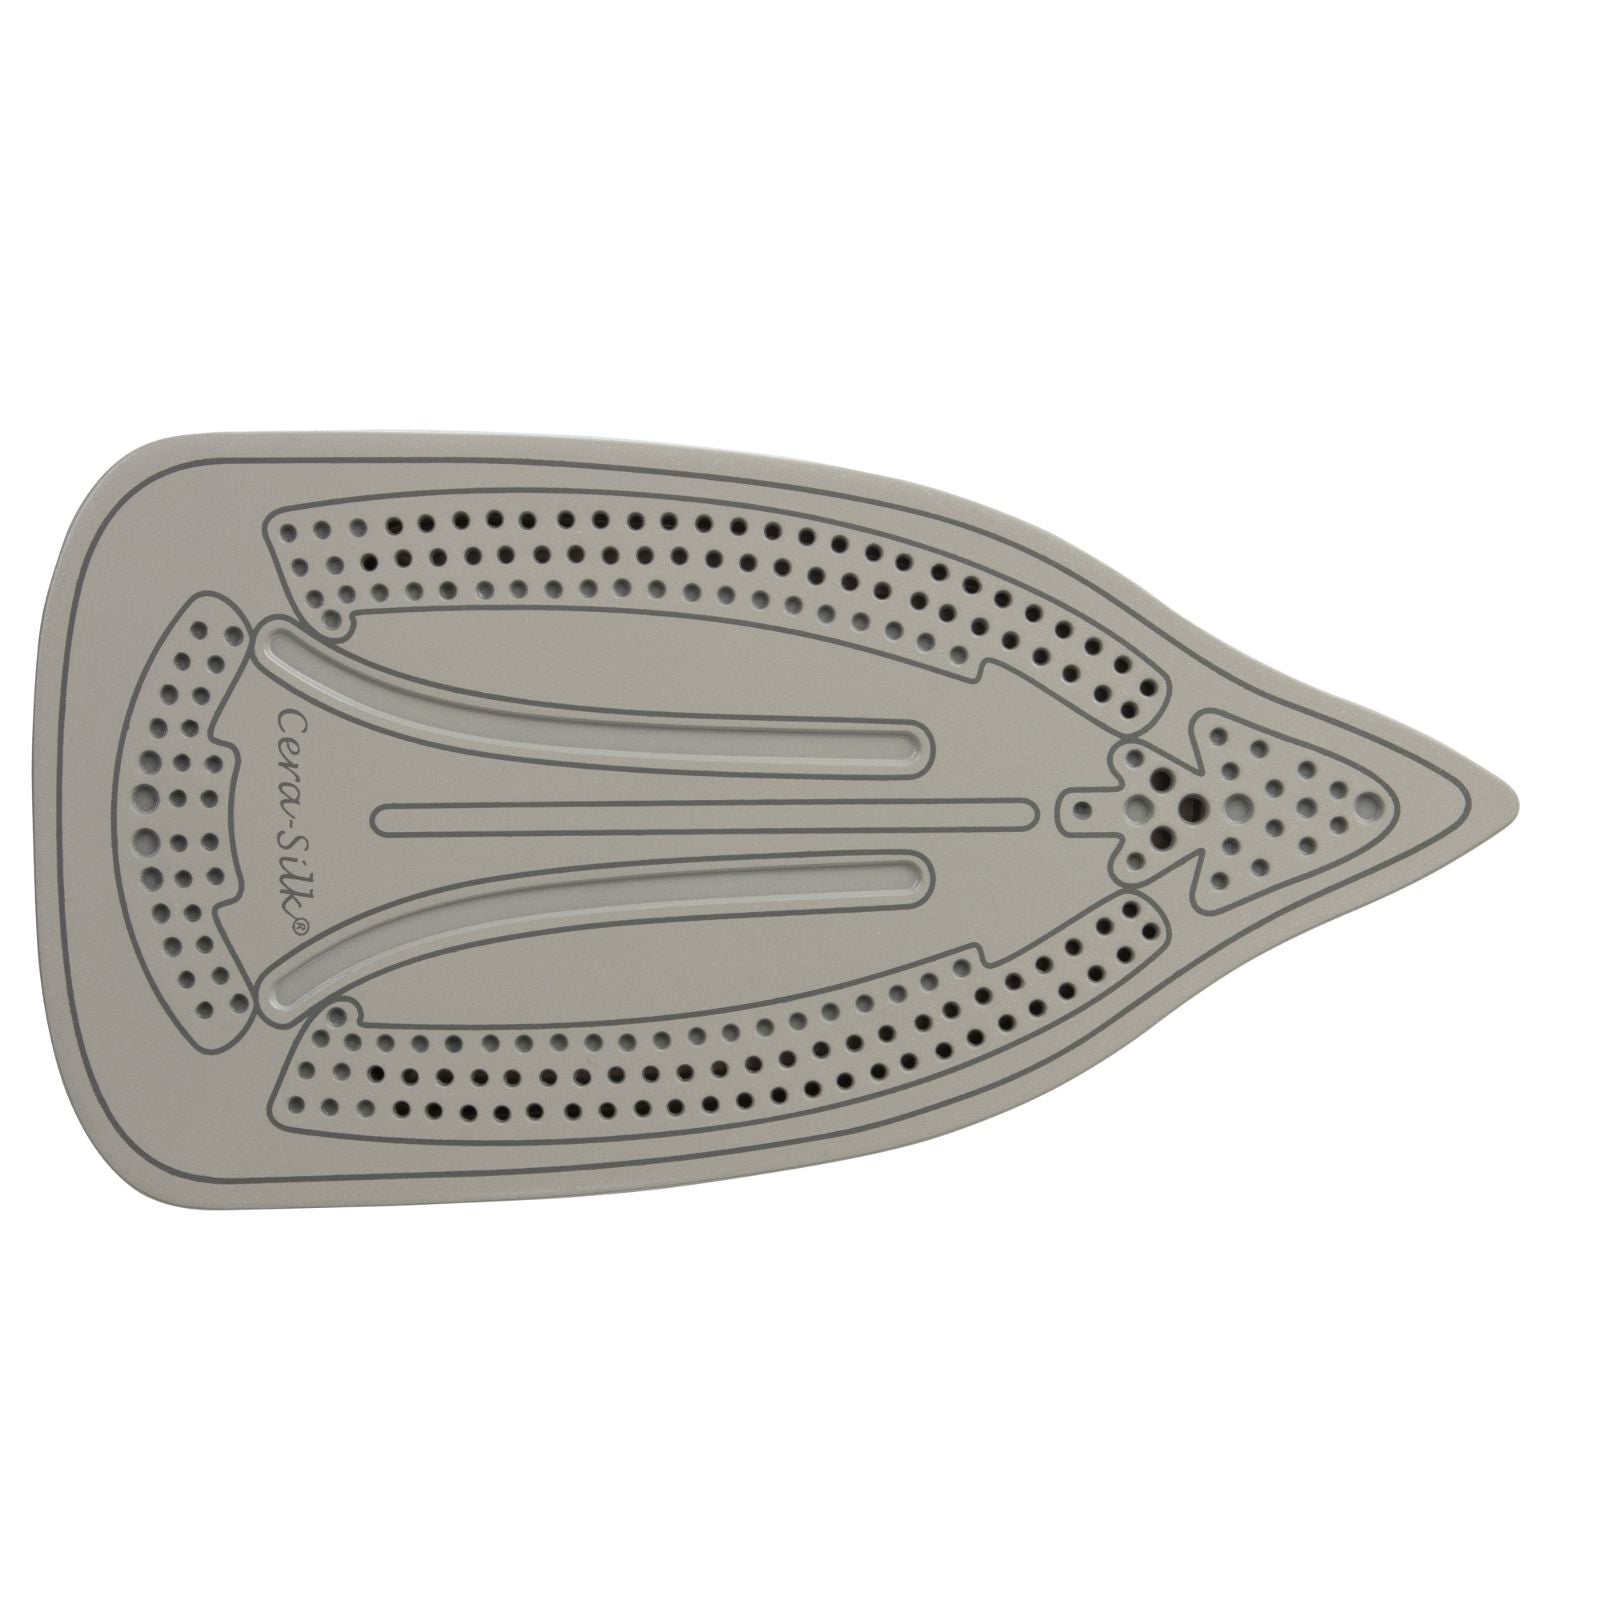 Westinghouse Iron 2400W Ceramic Sole Plate-#product_category#- Distributed by:  under license